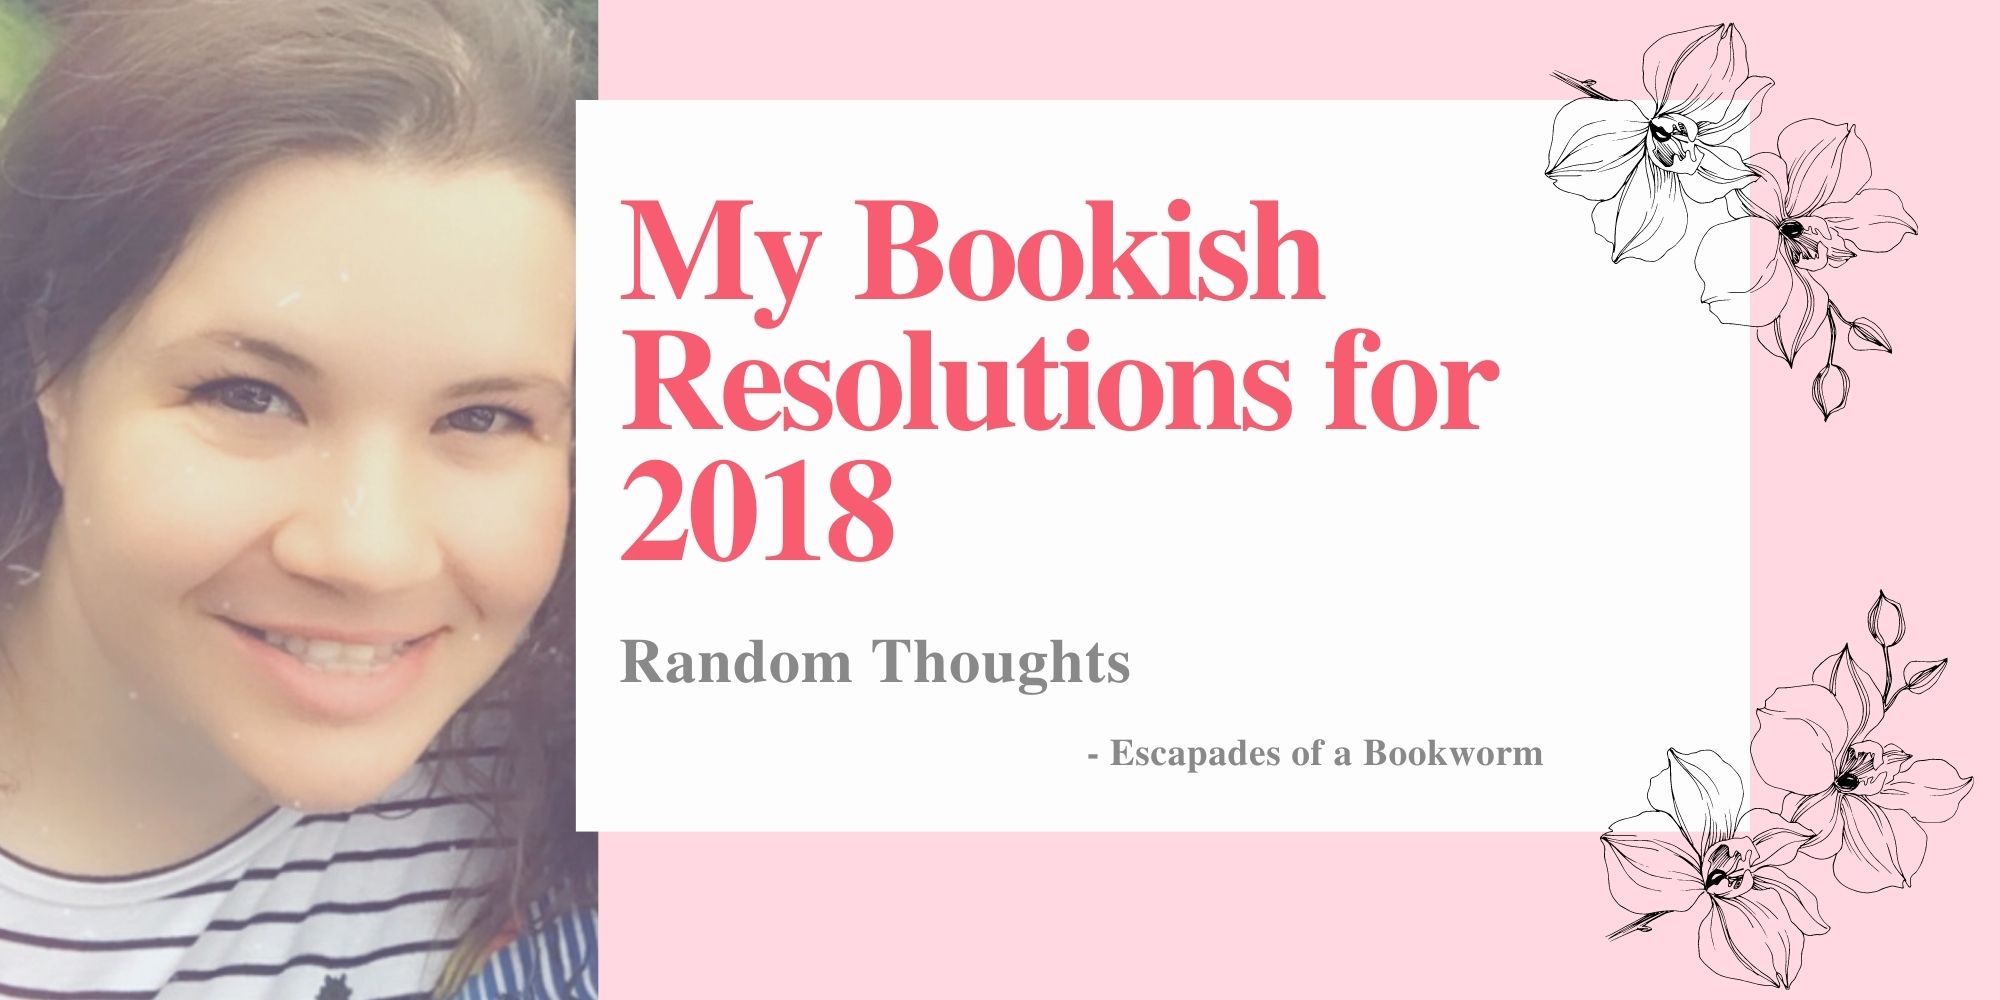 Random Thoughts: My Bookish Resolutions for 2018